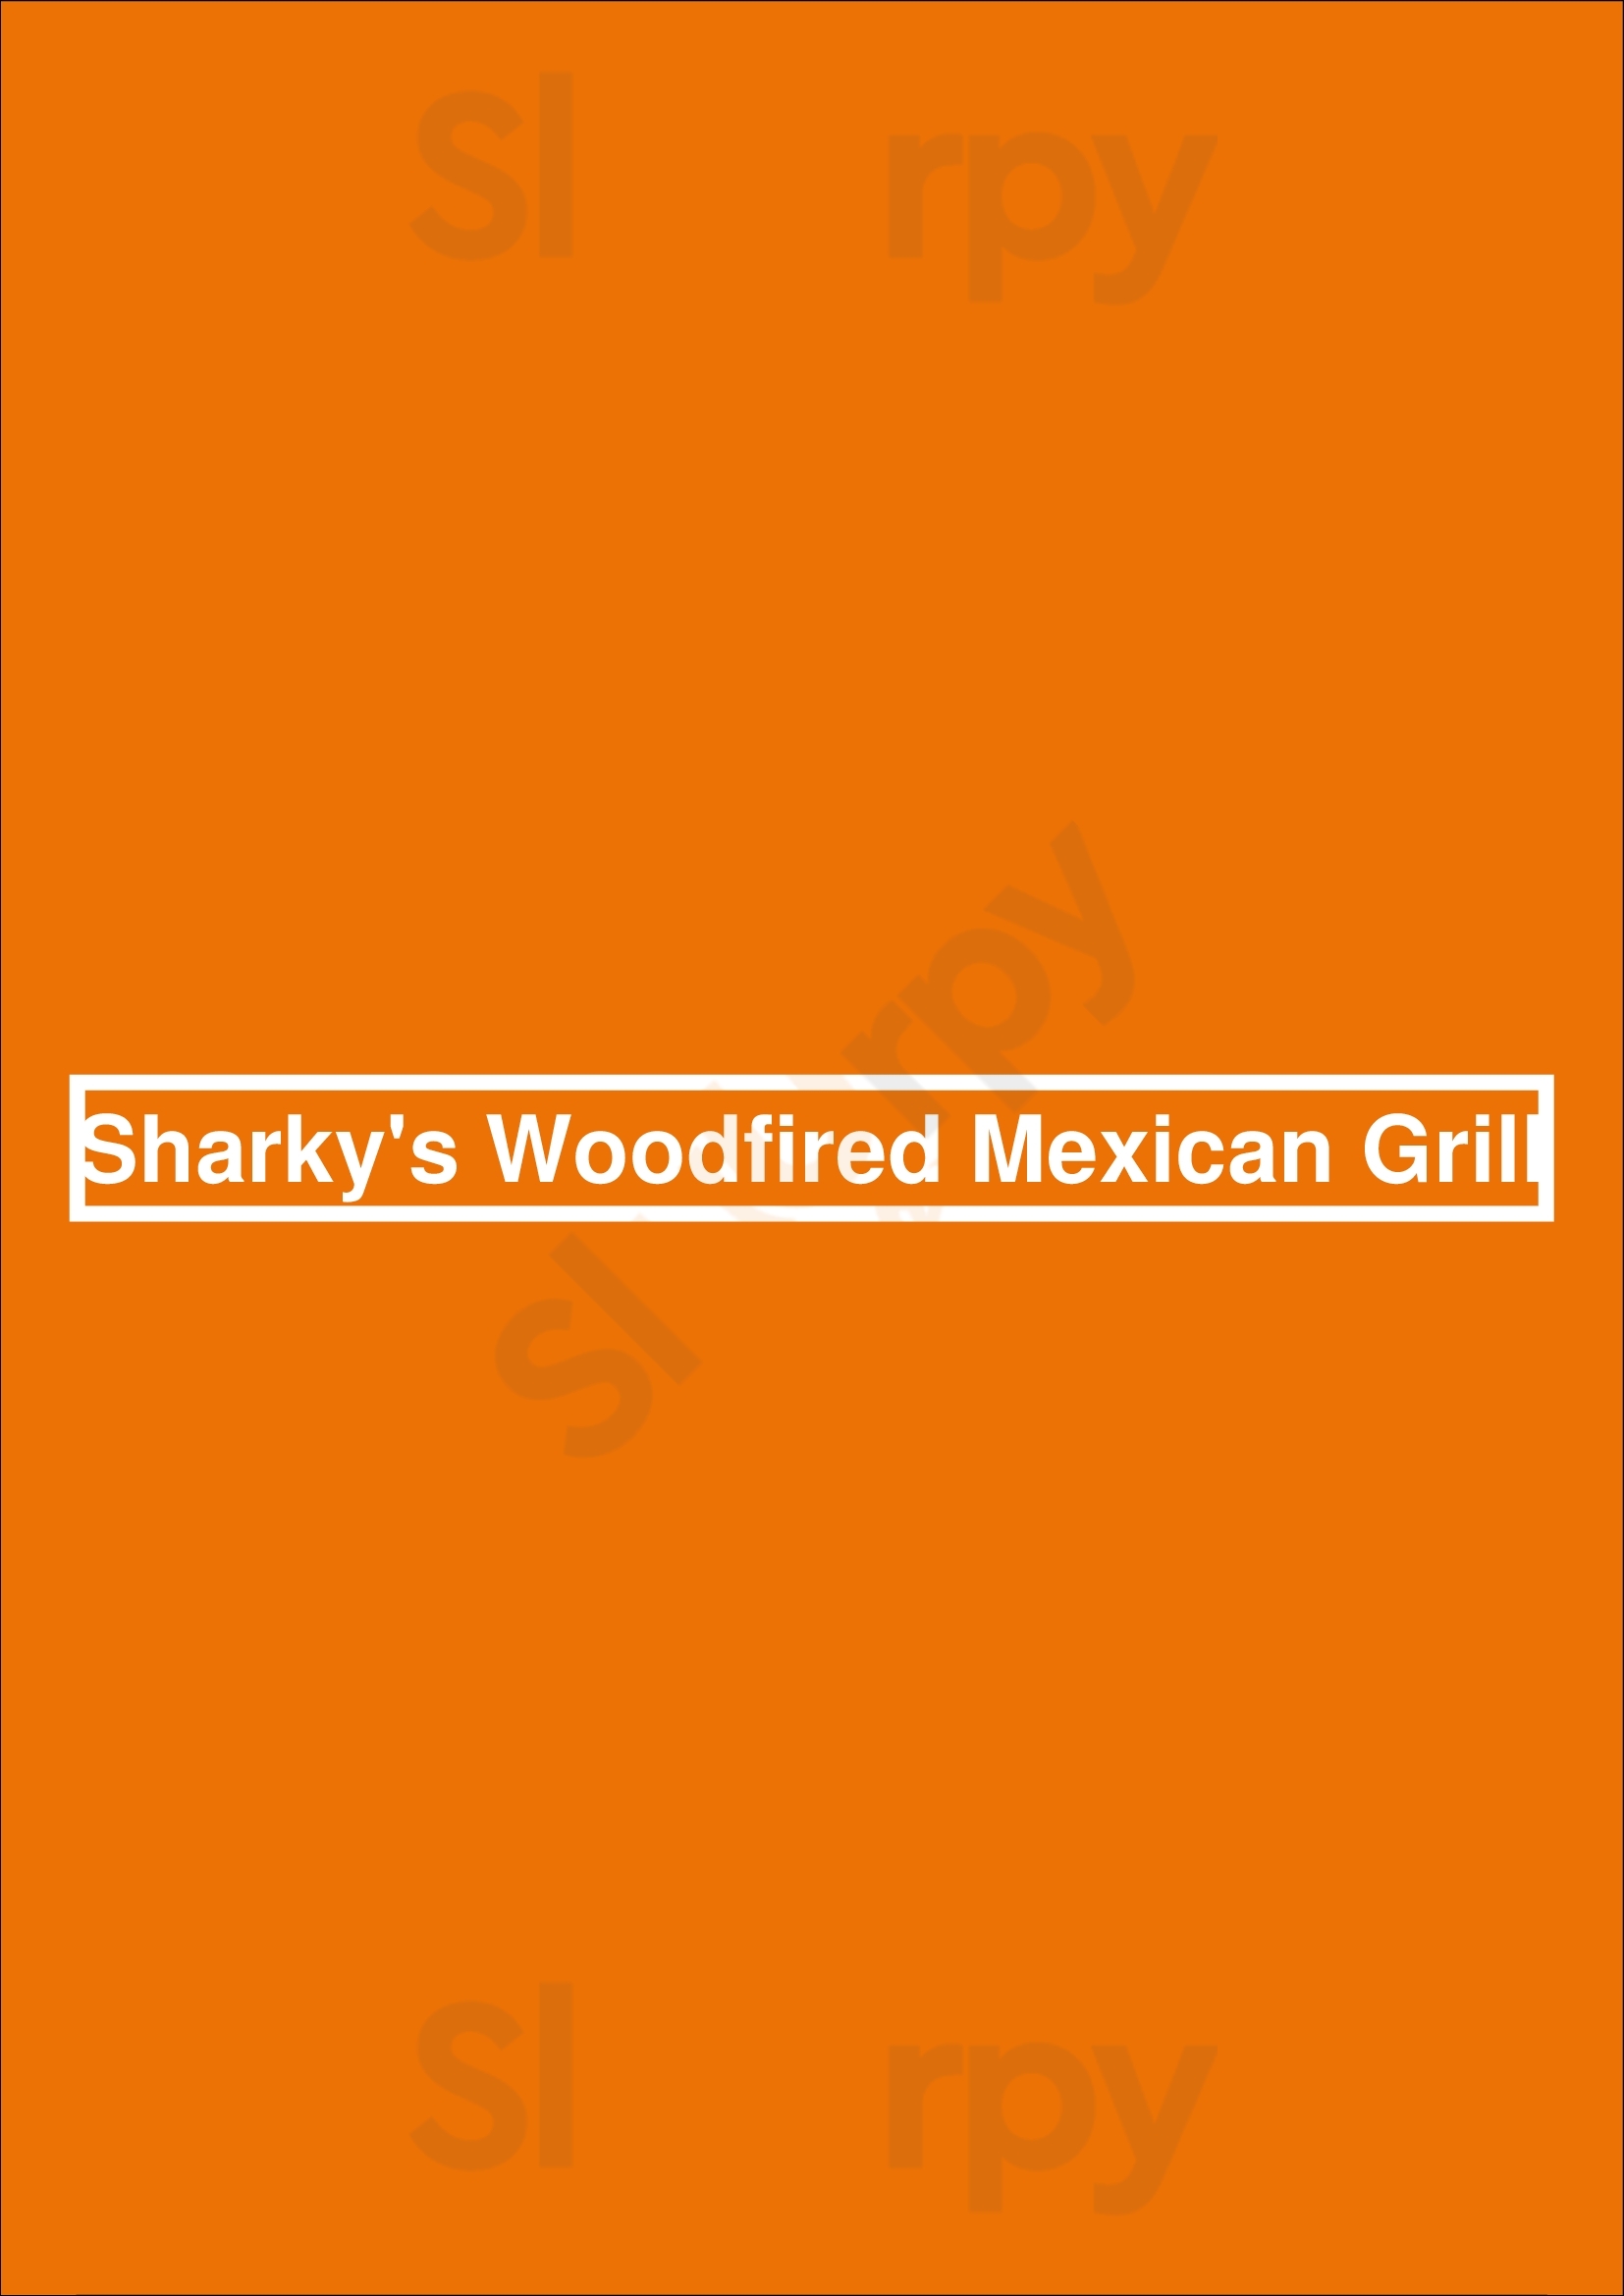 Sharky's Woodfired Mexican Grill Newport Beach Menu - 1